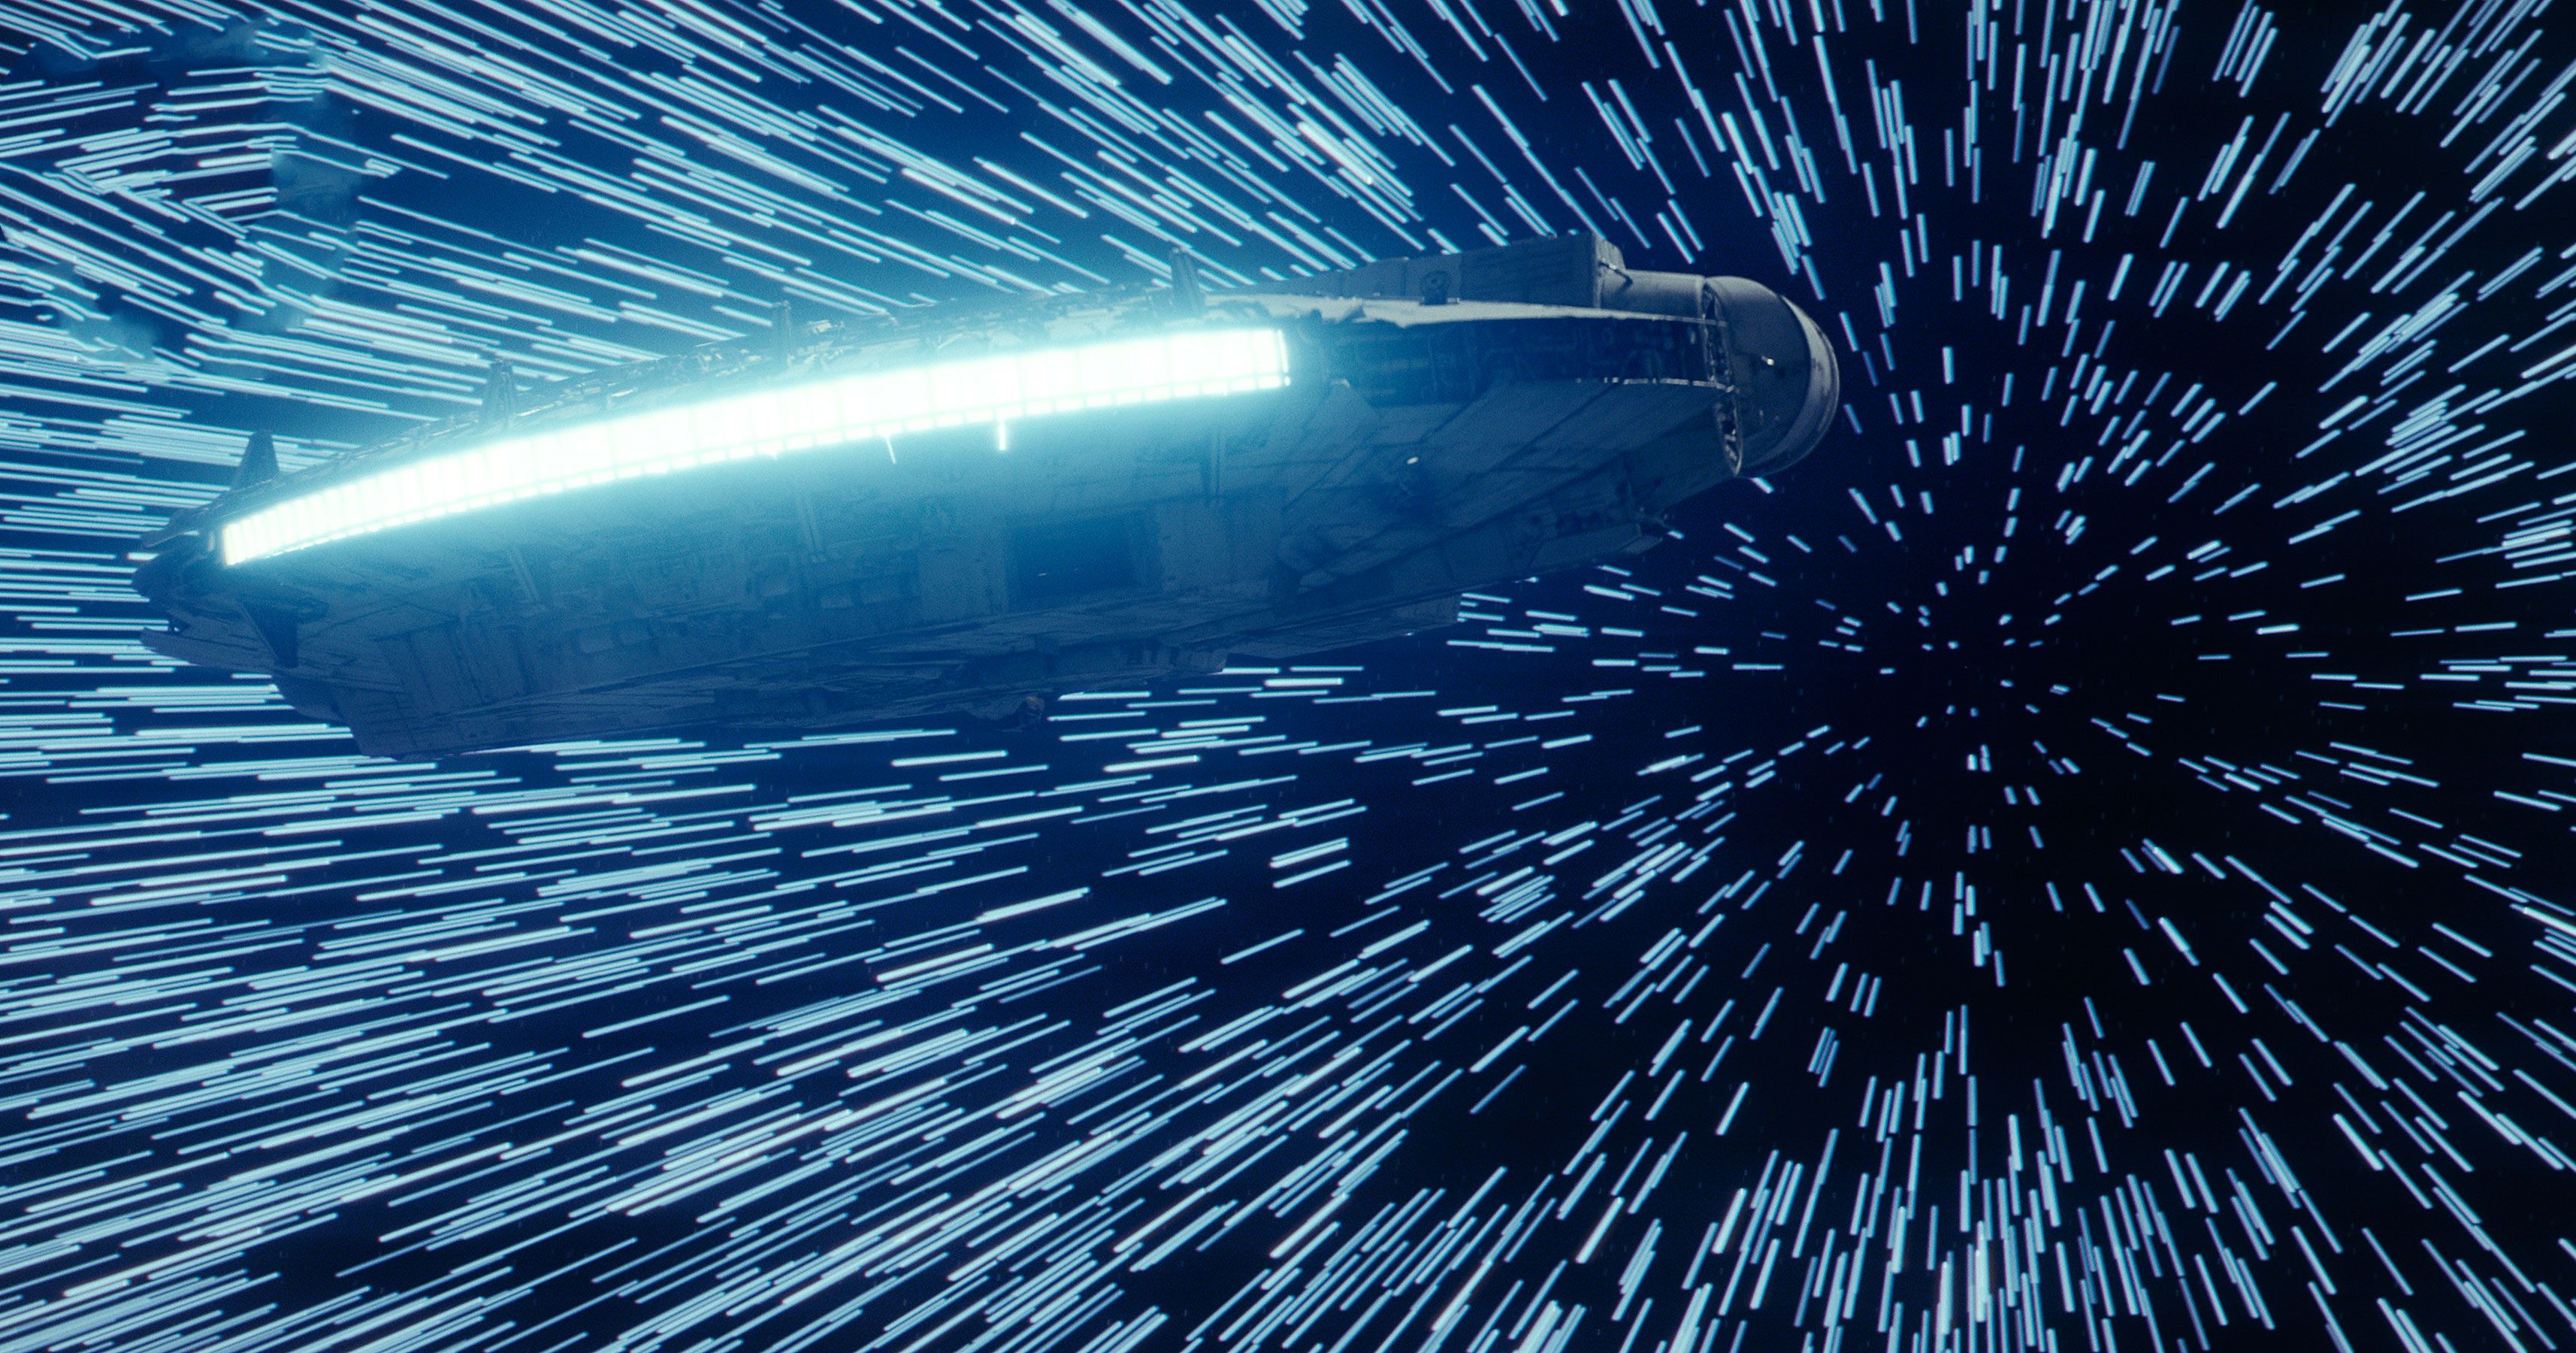 android star wars live wallpaper hyperspace